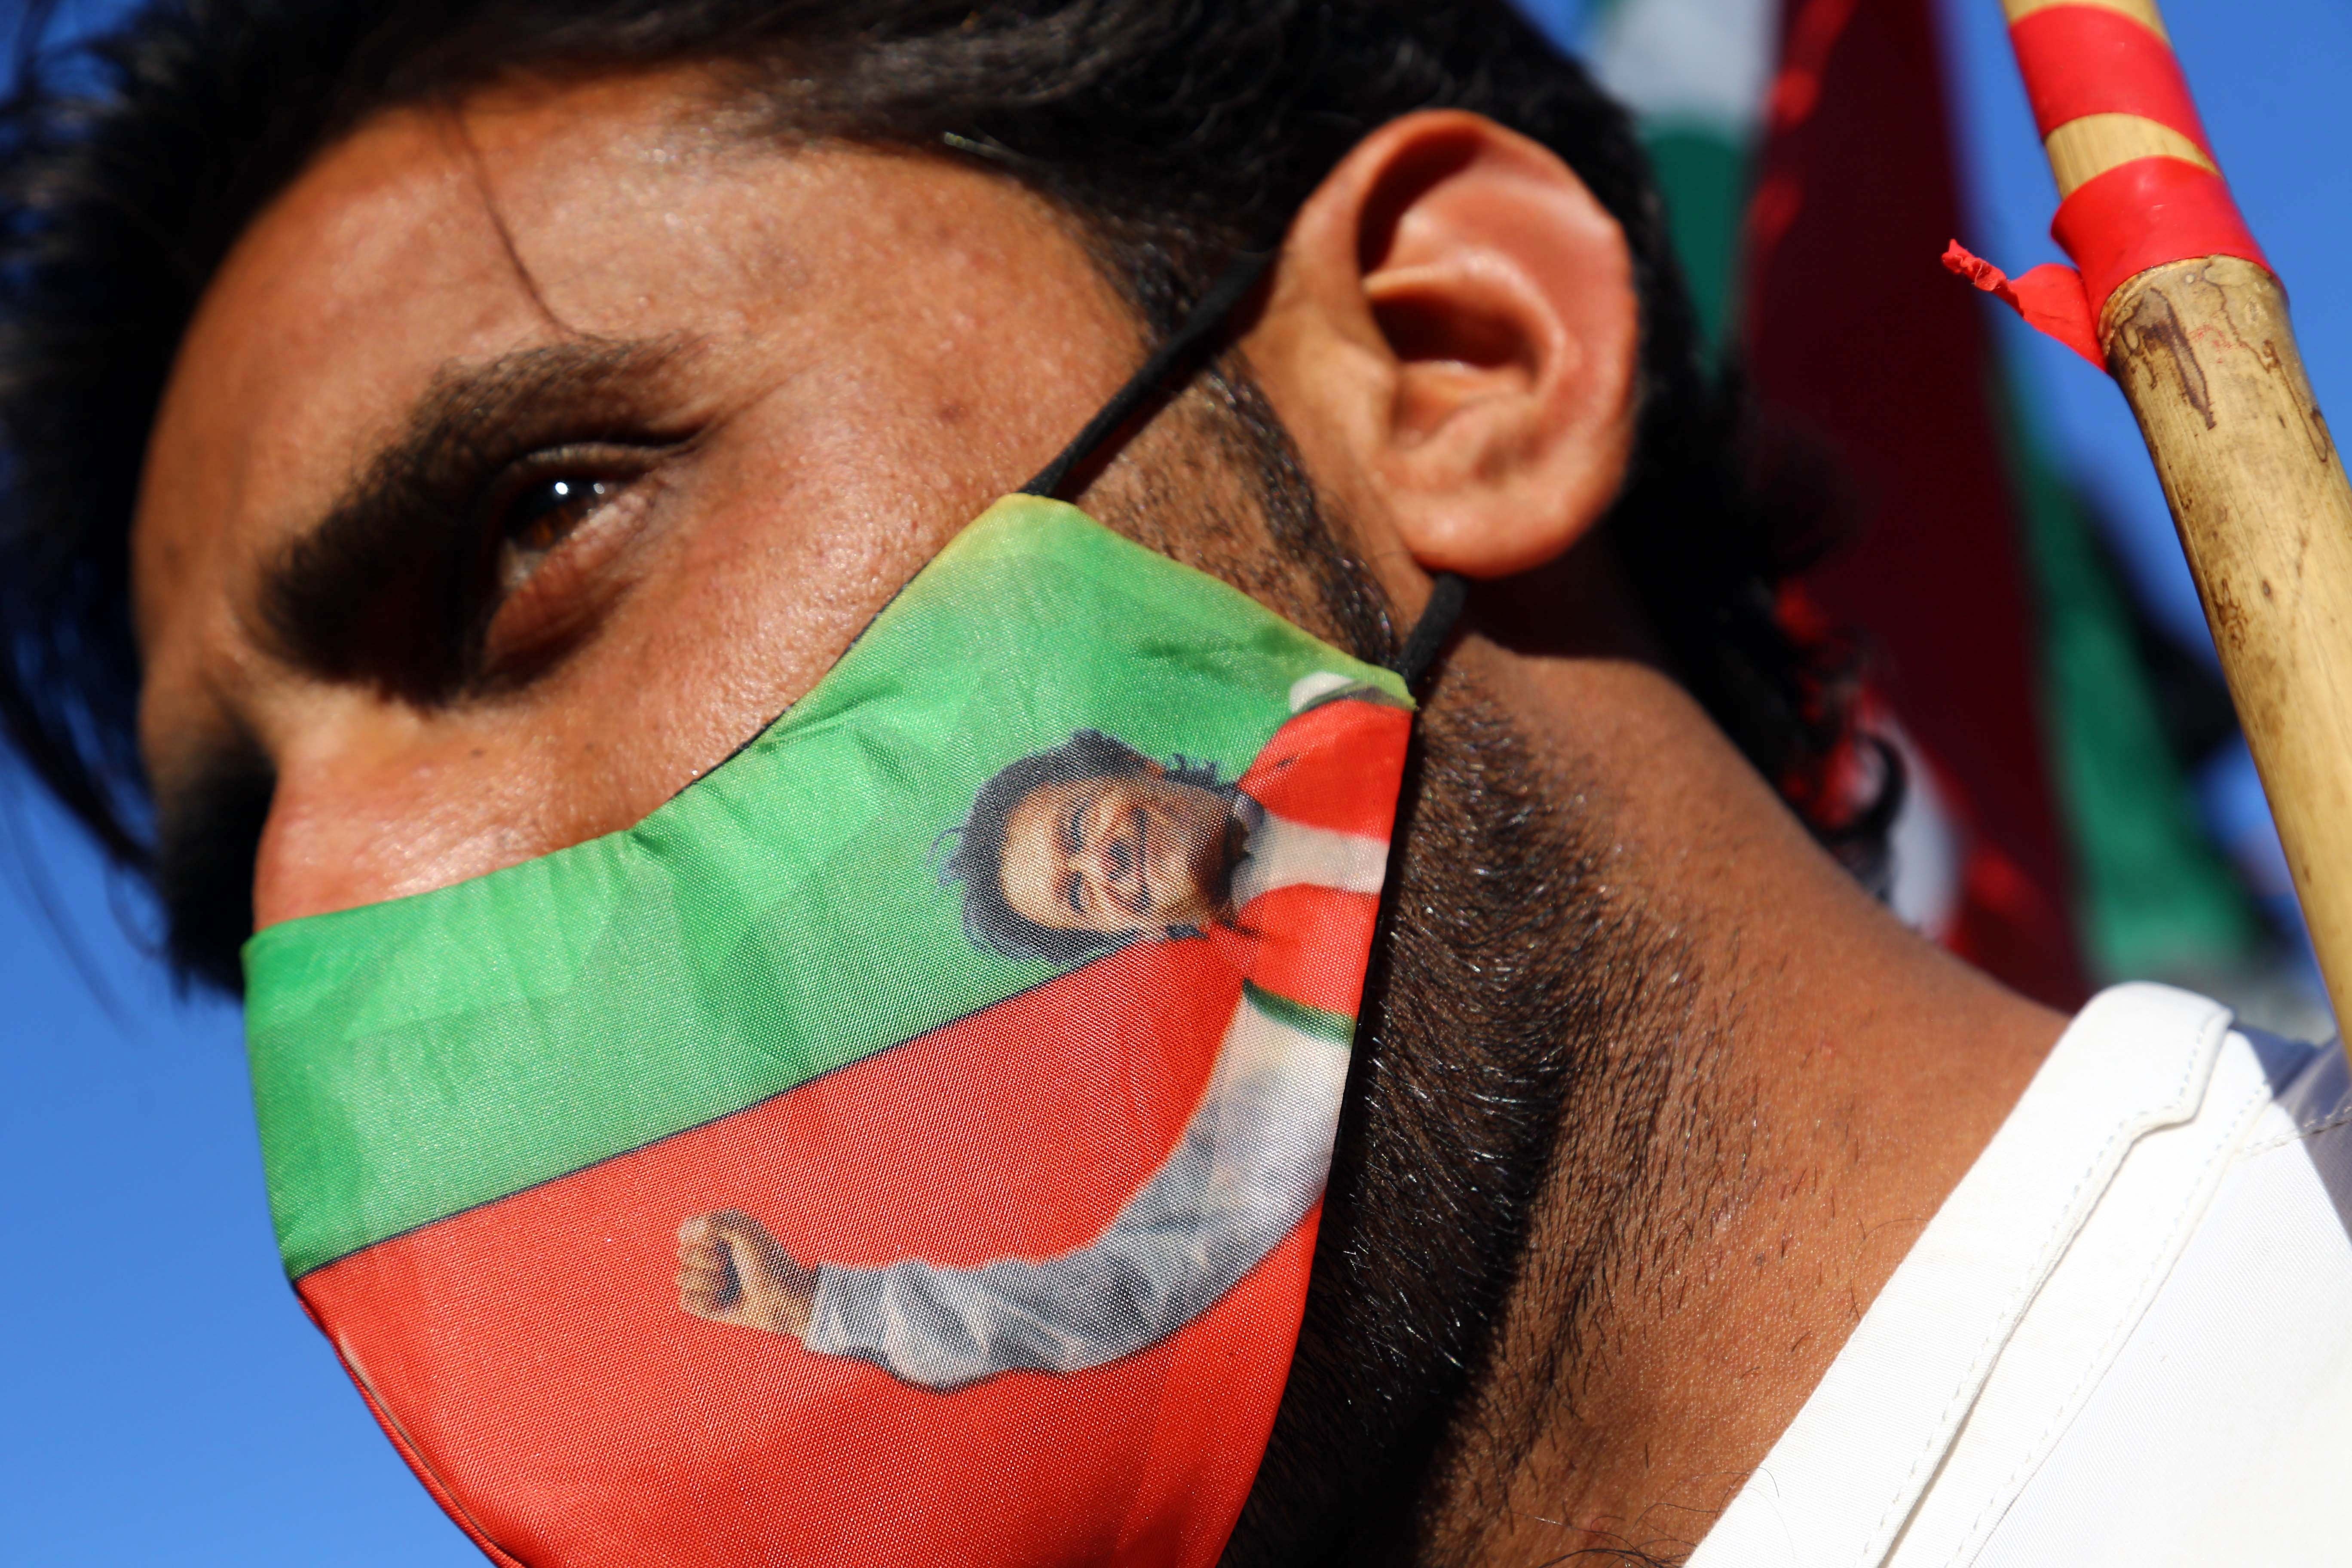 A supporter of the Pakistan Tehrik-e-Insaf (PTI) political party wears a facemask with the picture of party leader Imran Khan, during a protest against alleged rigging in the general election